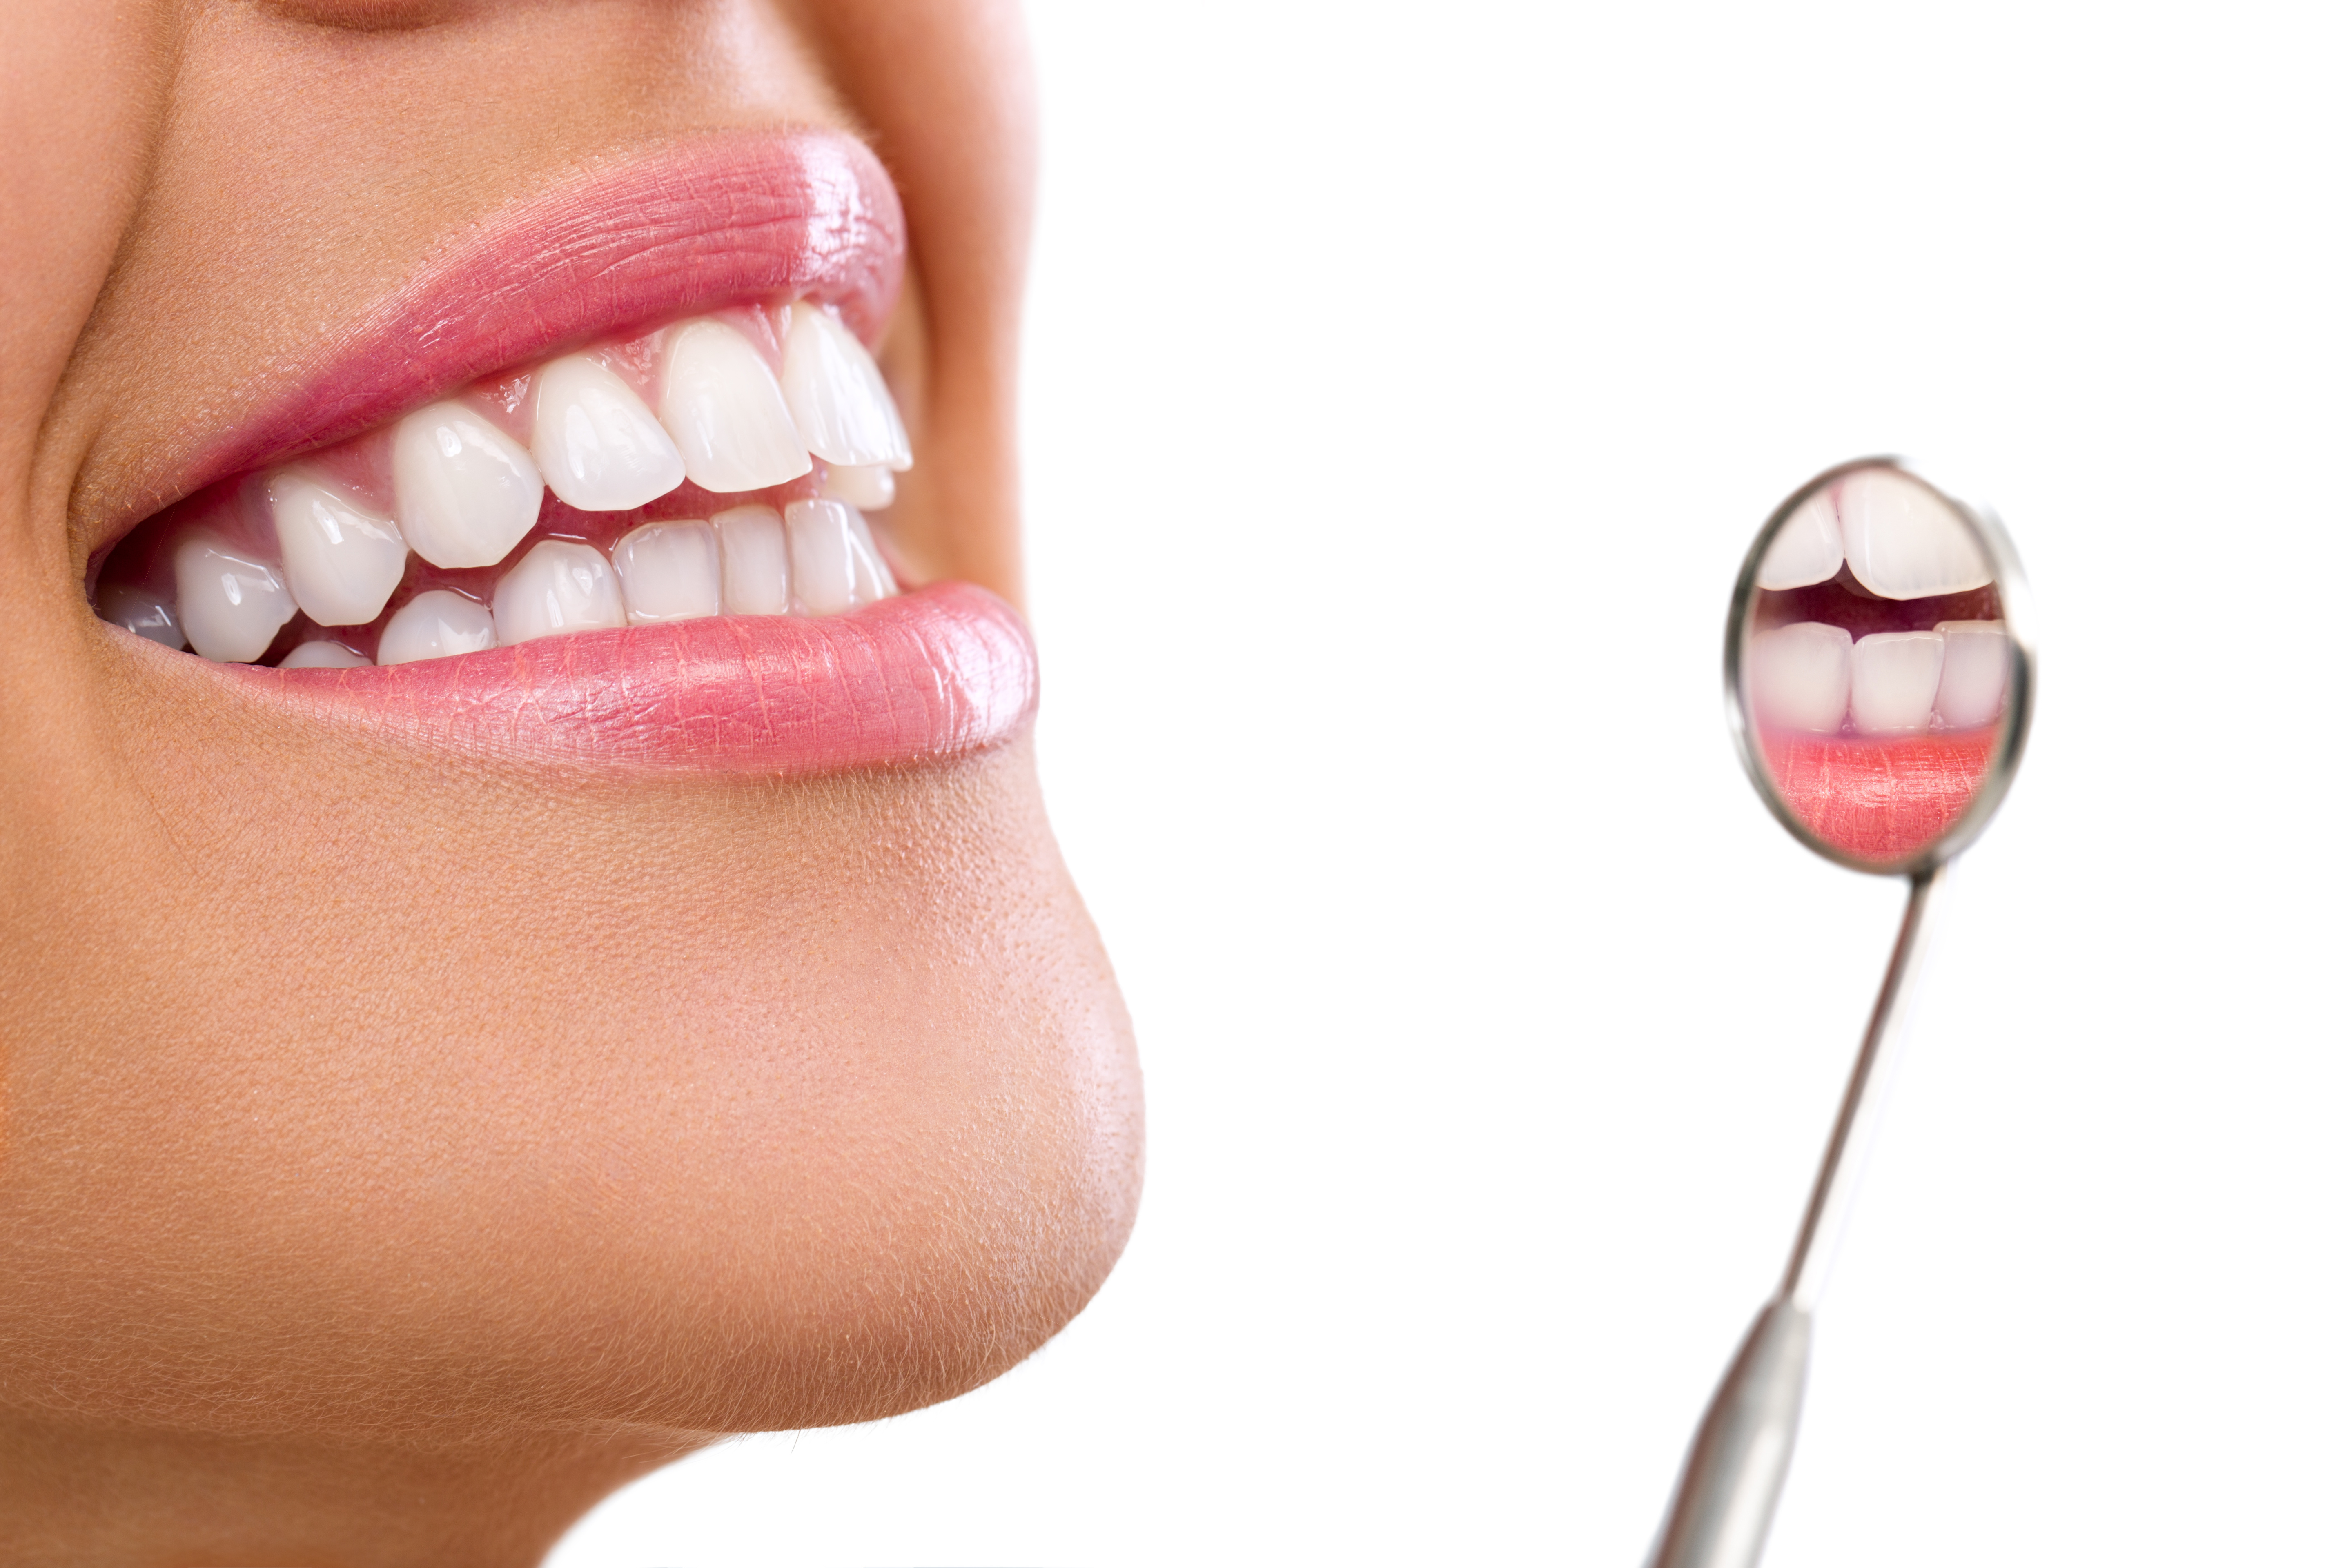 Amalgam Removal Expert is a Dentist in Manchester